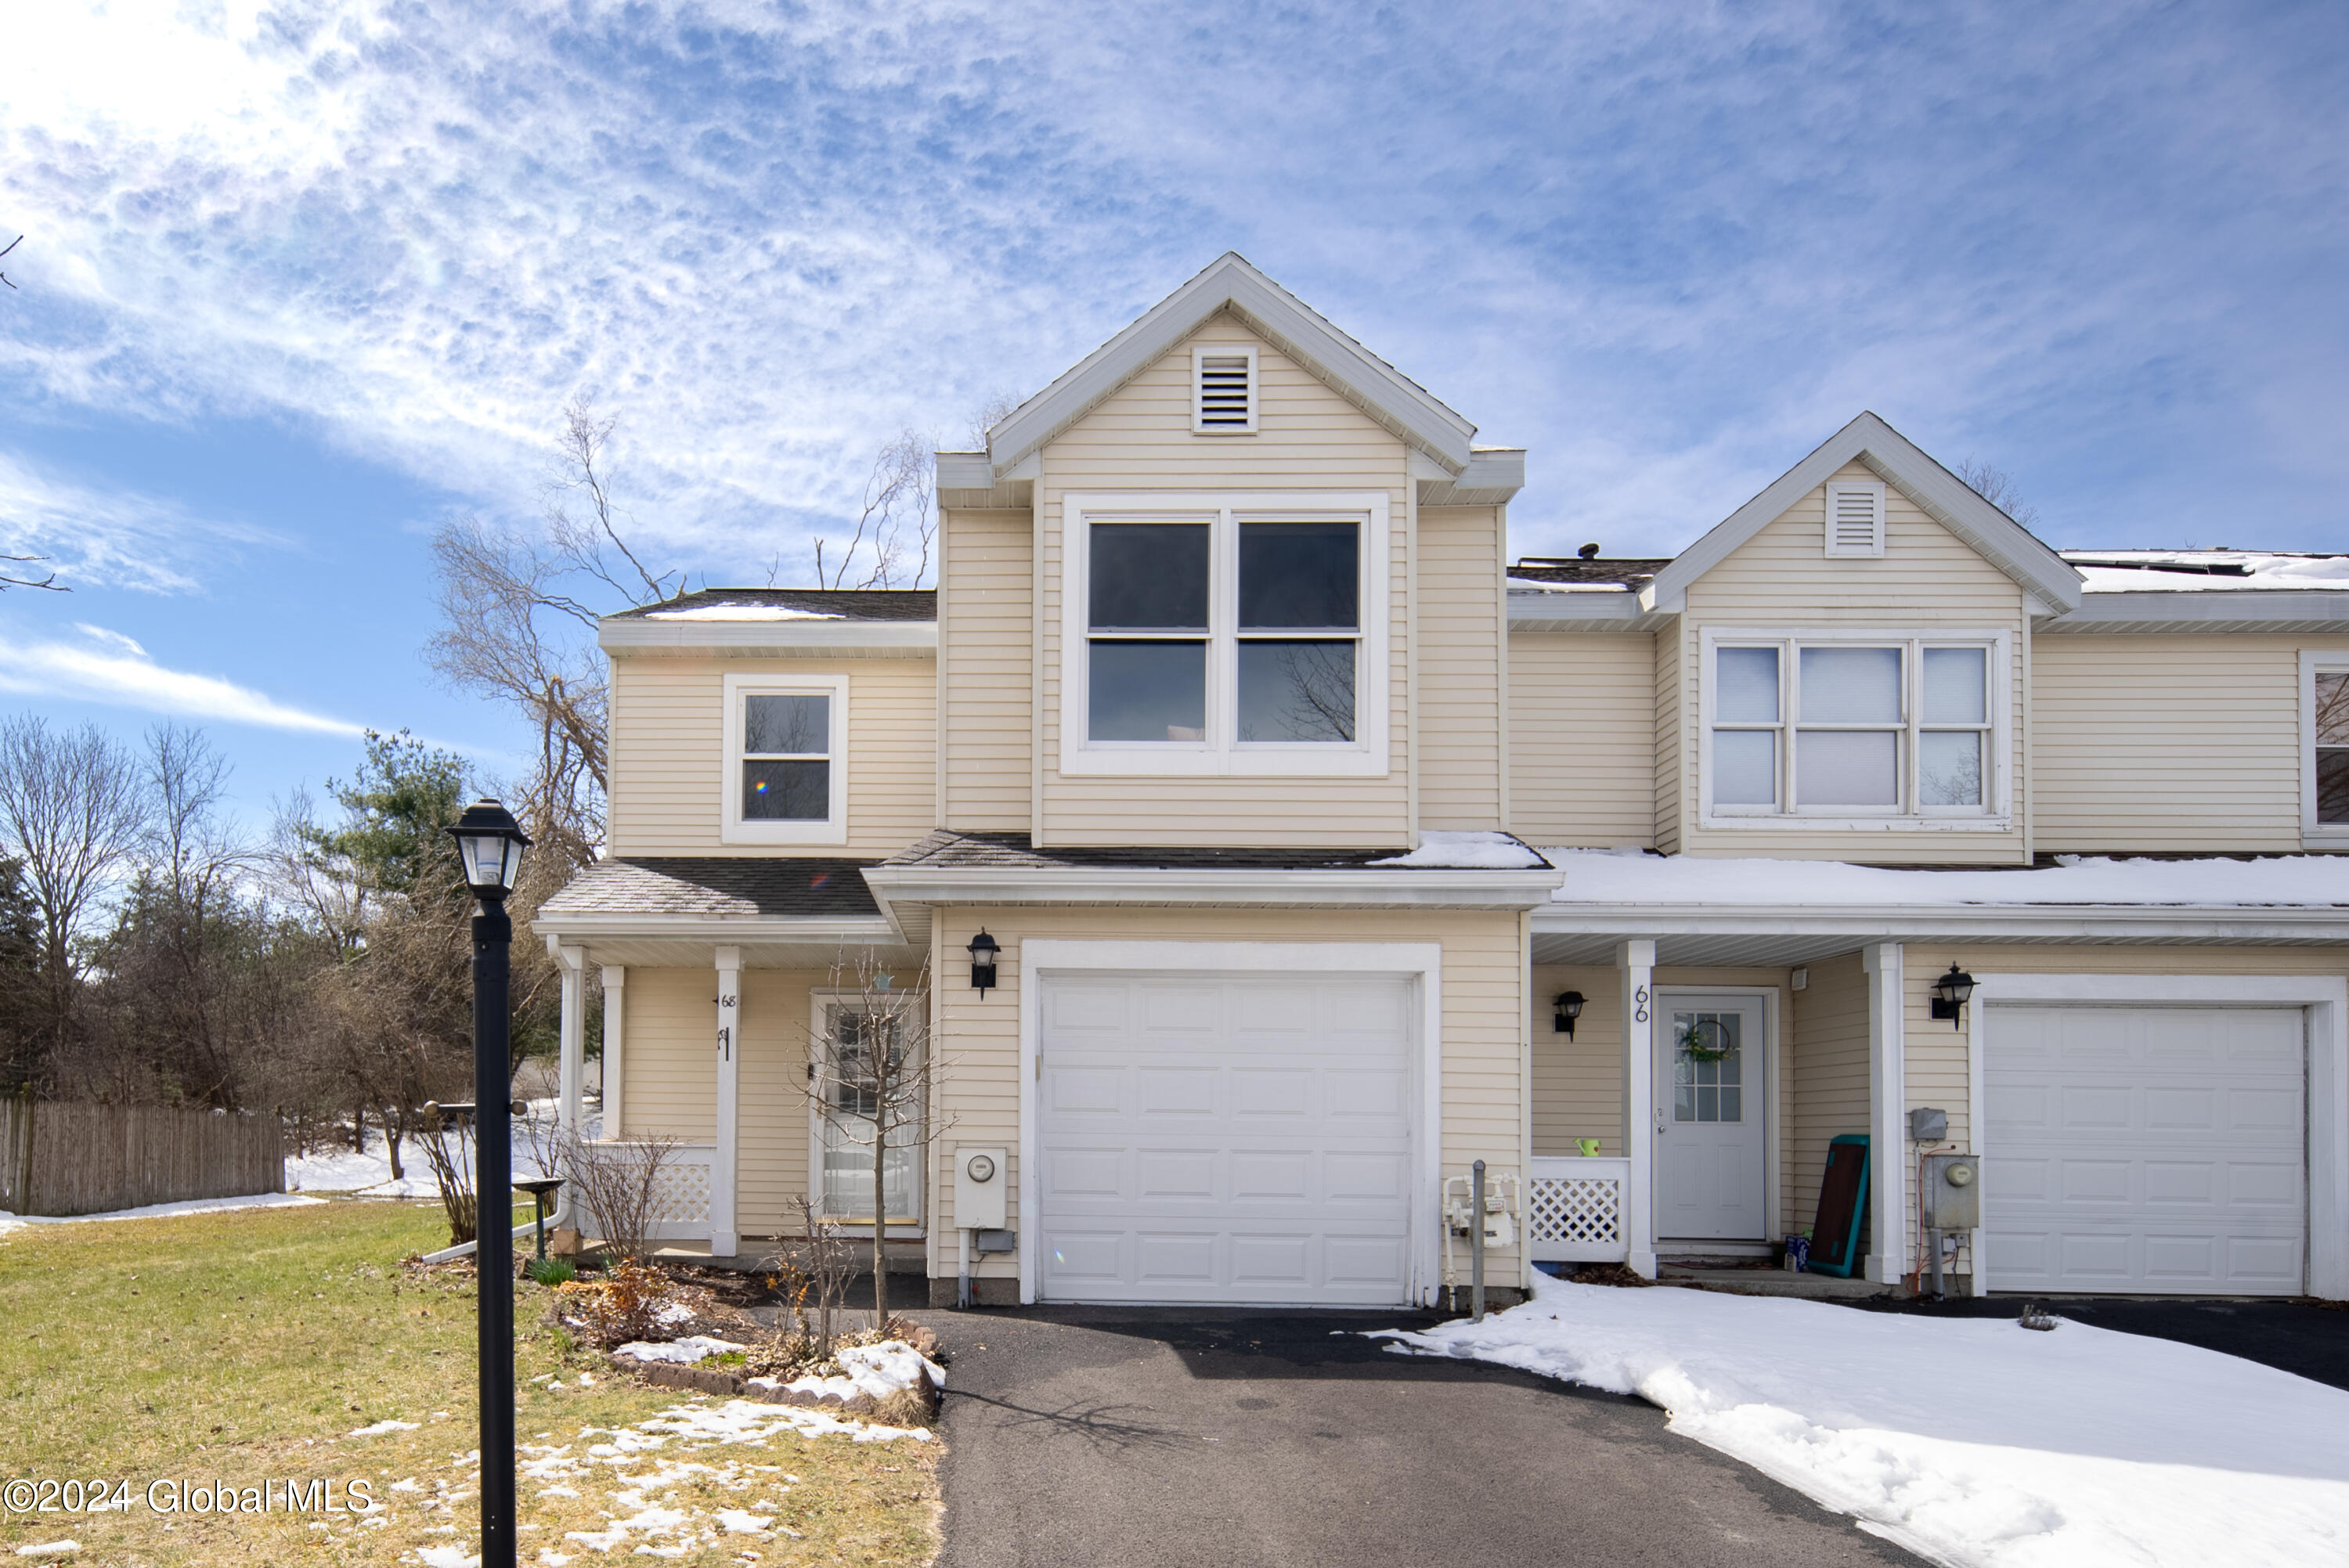 View Rensselaer, NY 12144 townhome